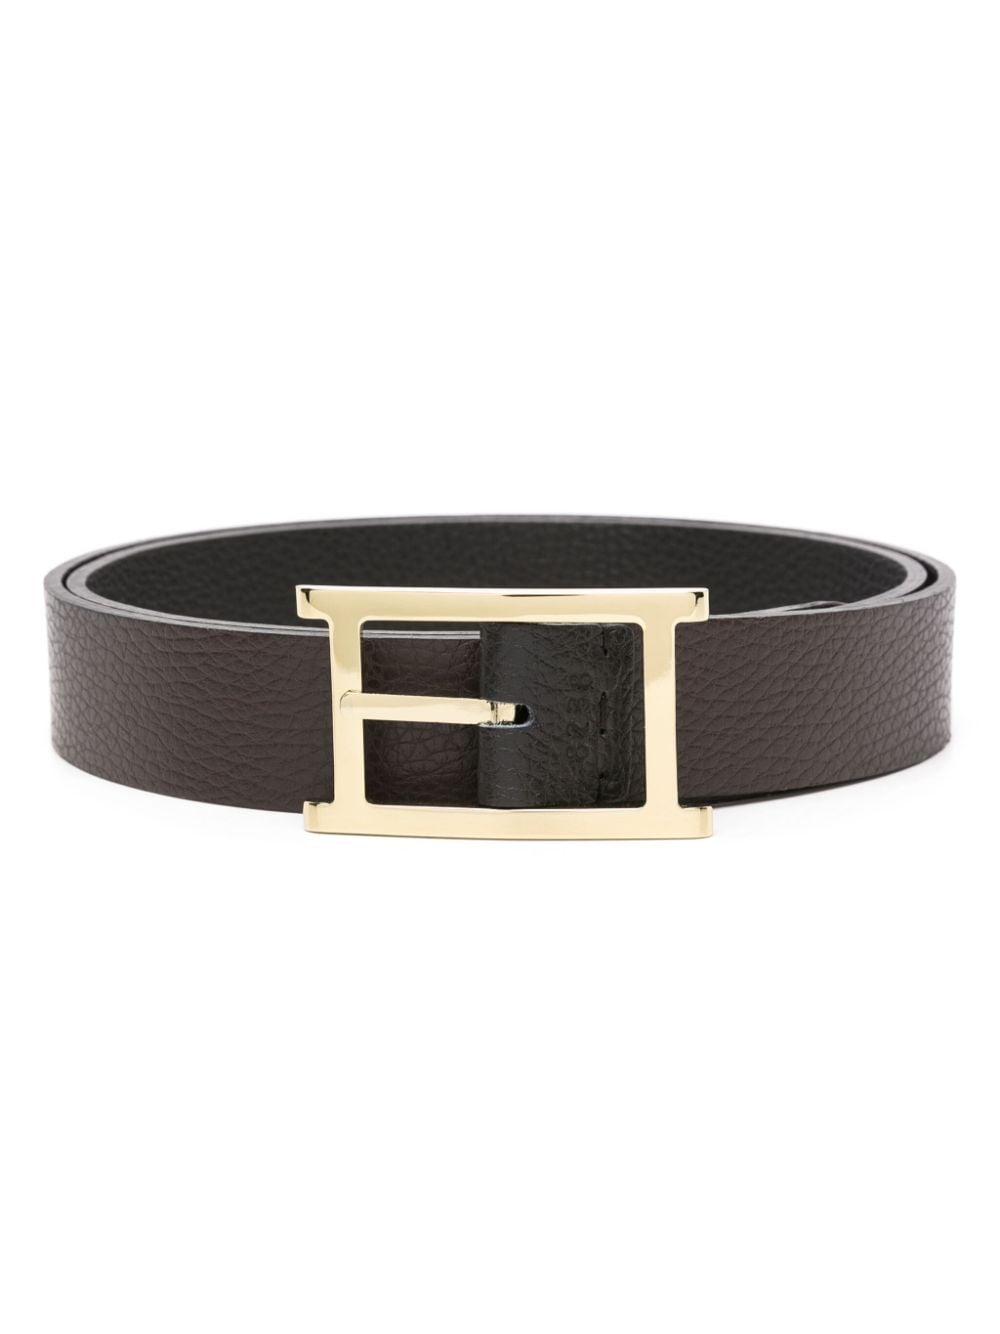 Orciani Reversible Leather Belt In Black